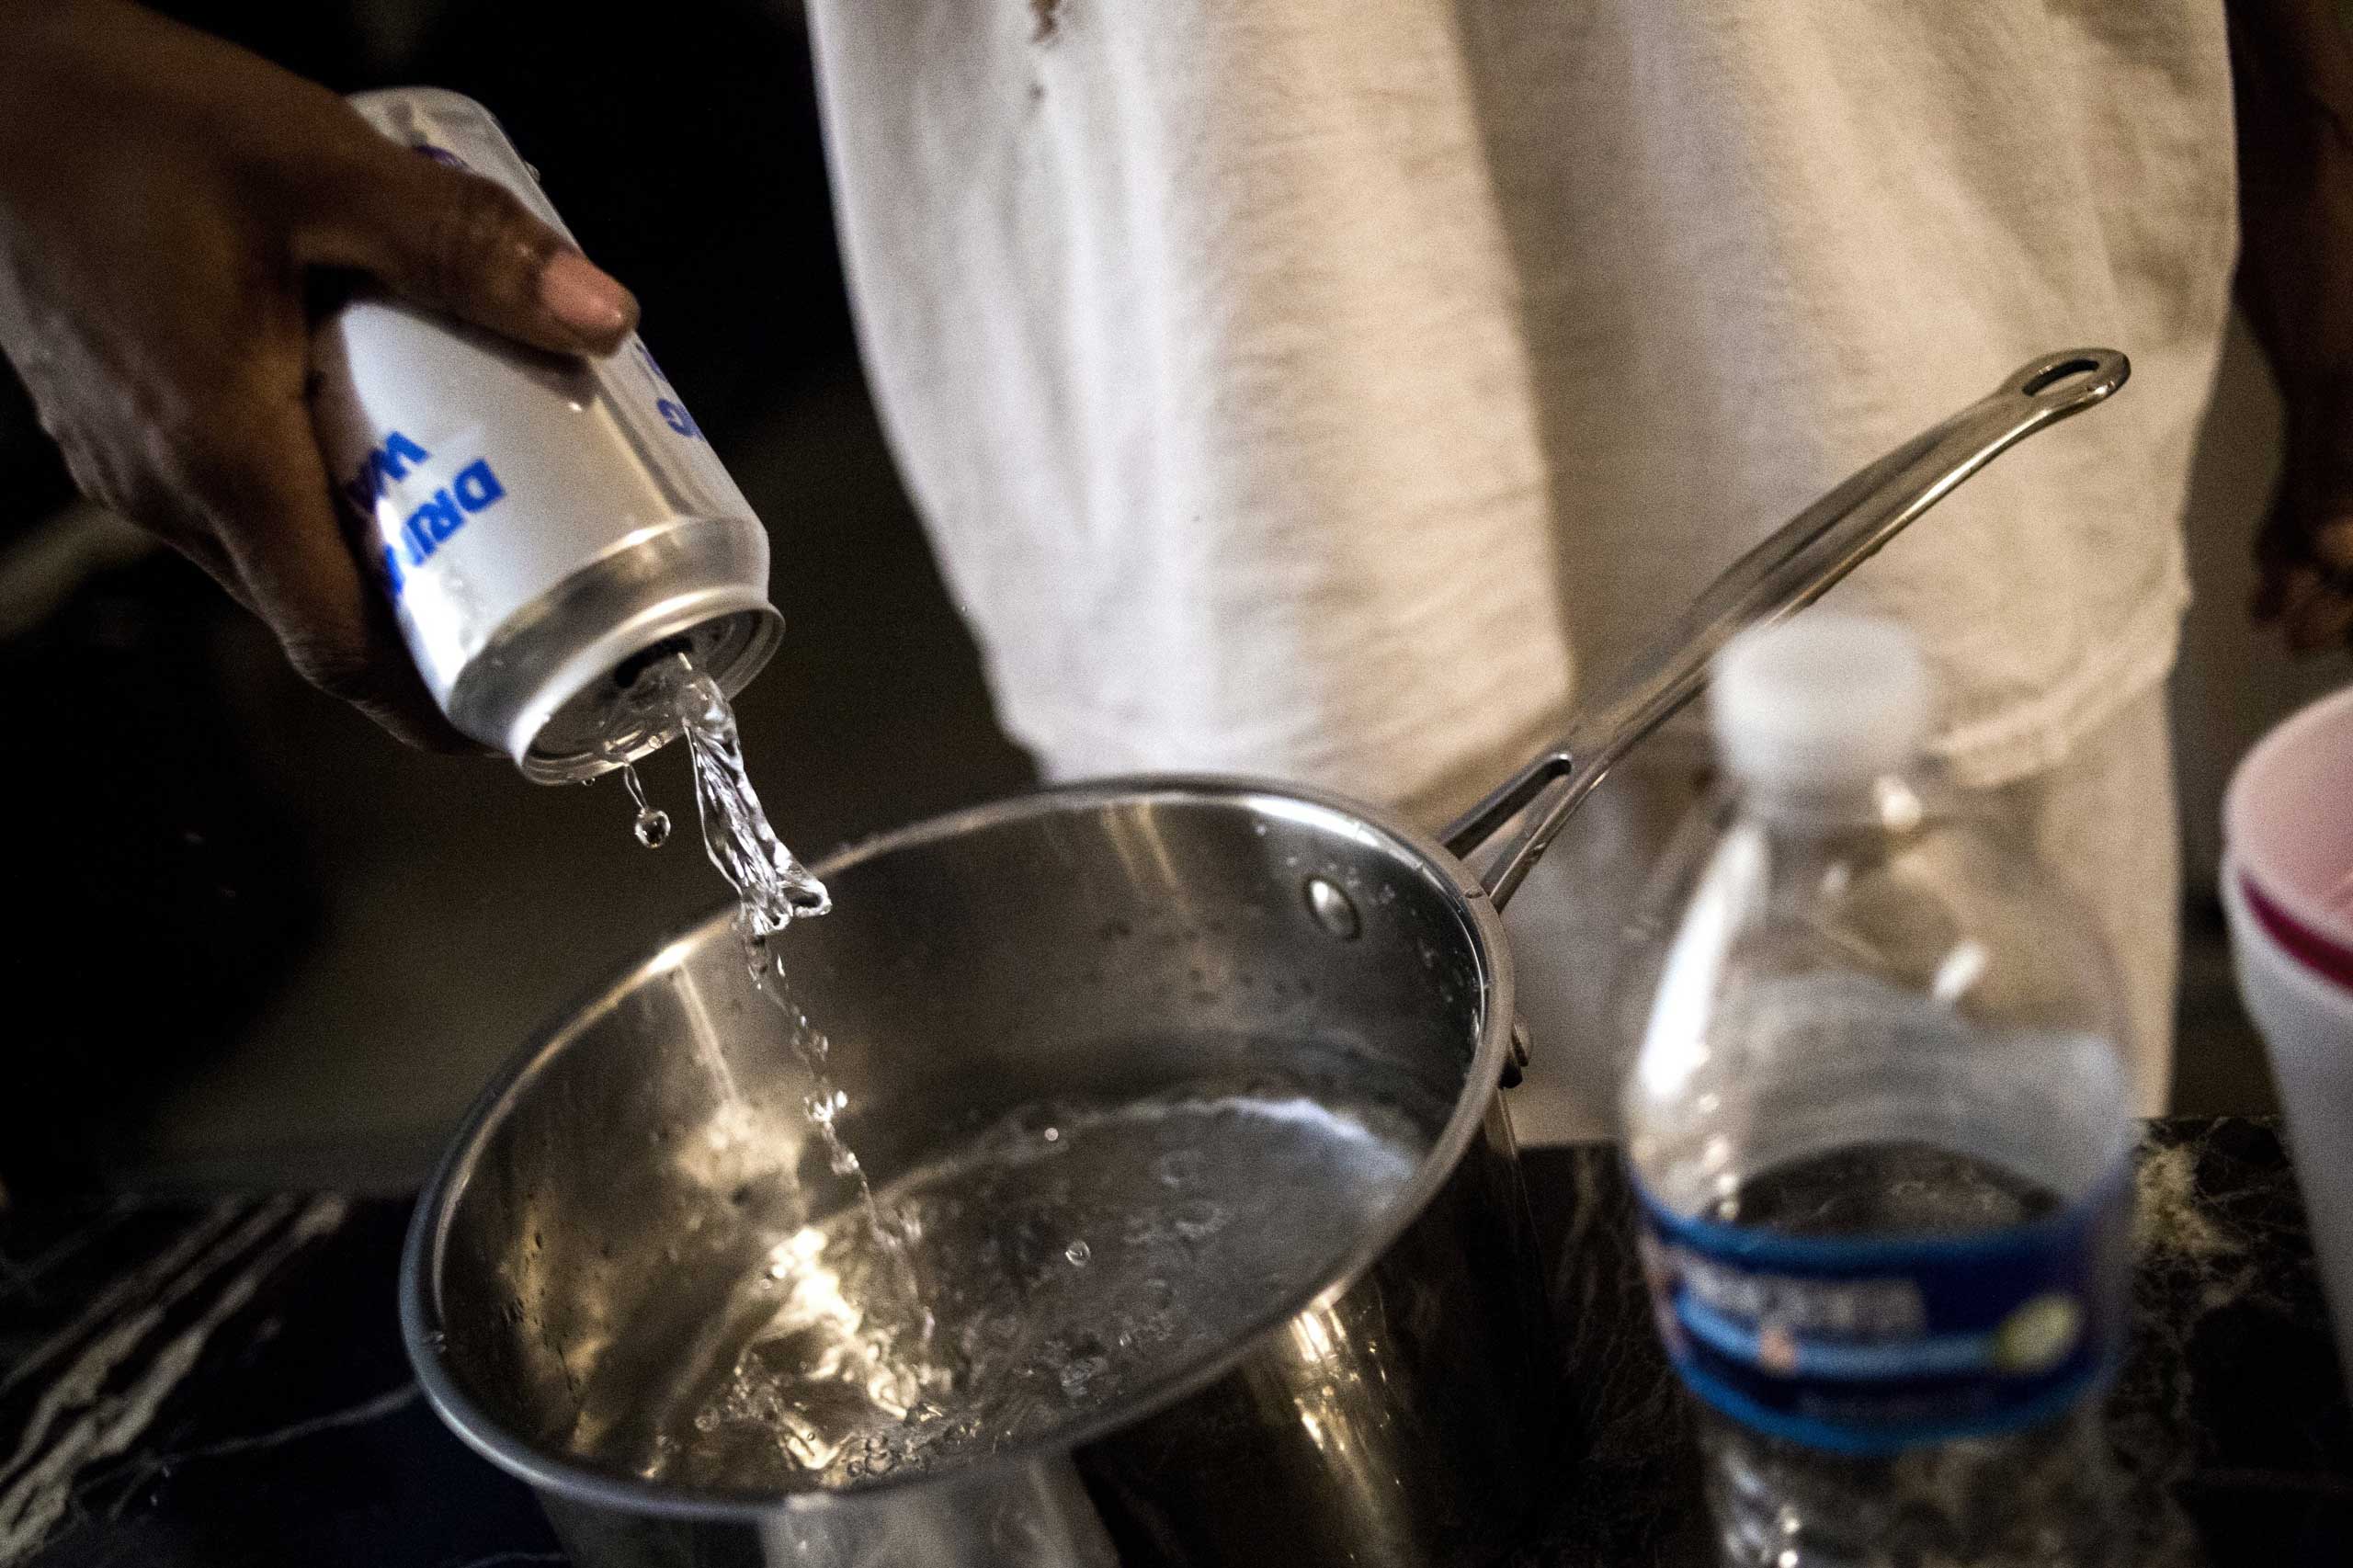 Flint resident Lorraine Jones pours canned water into a pot in preparation for boiling to cook on Jan. 19, 2016, at River Park Apartments in Flint, Mich.